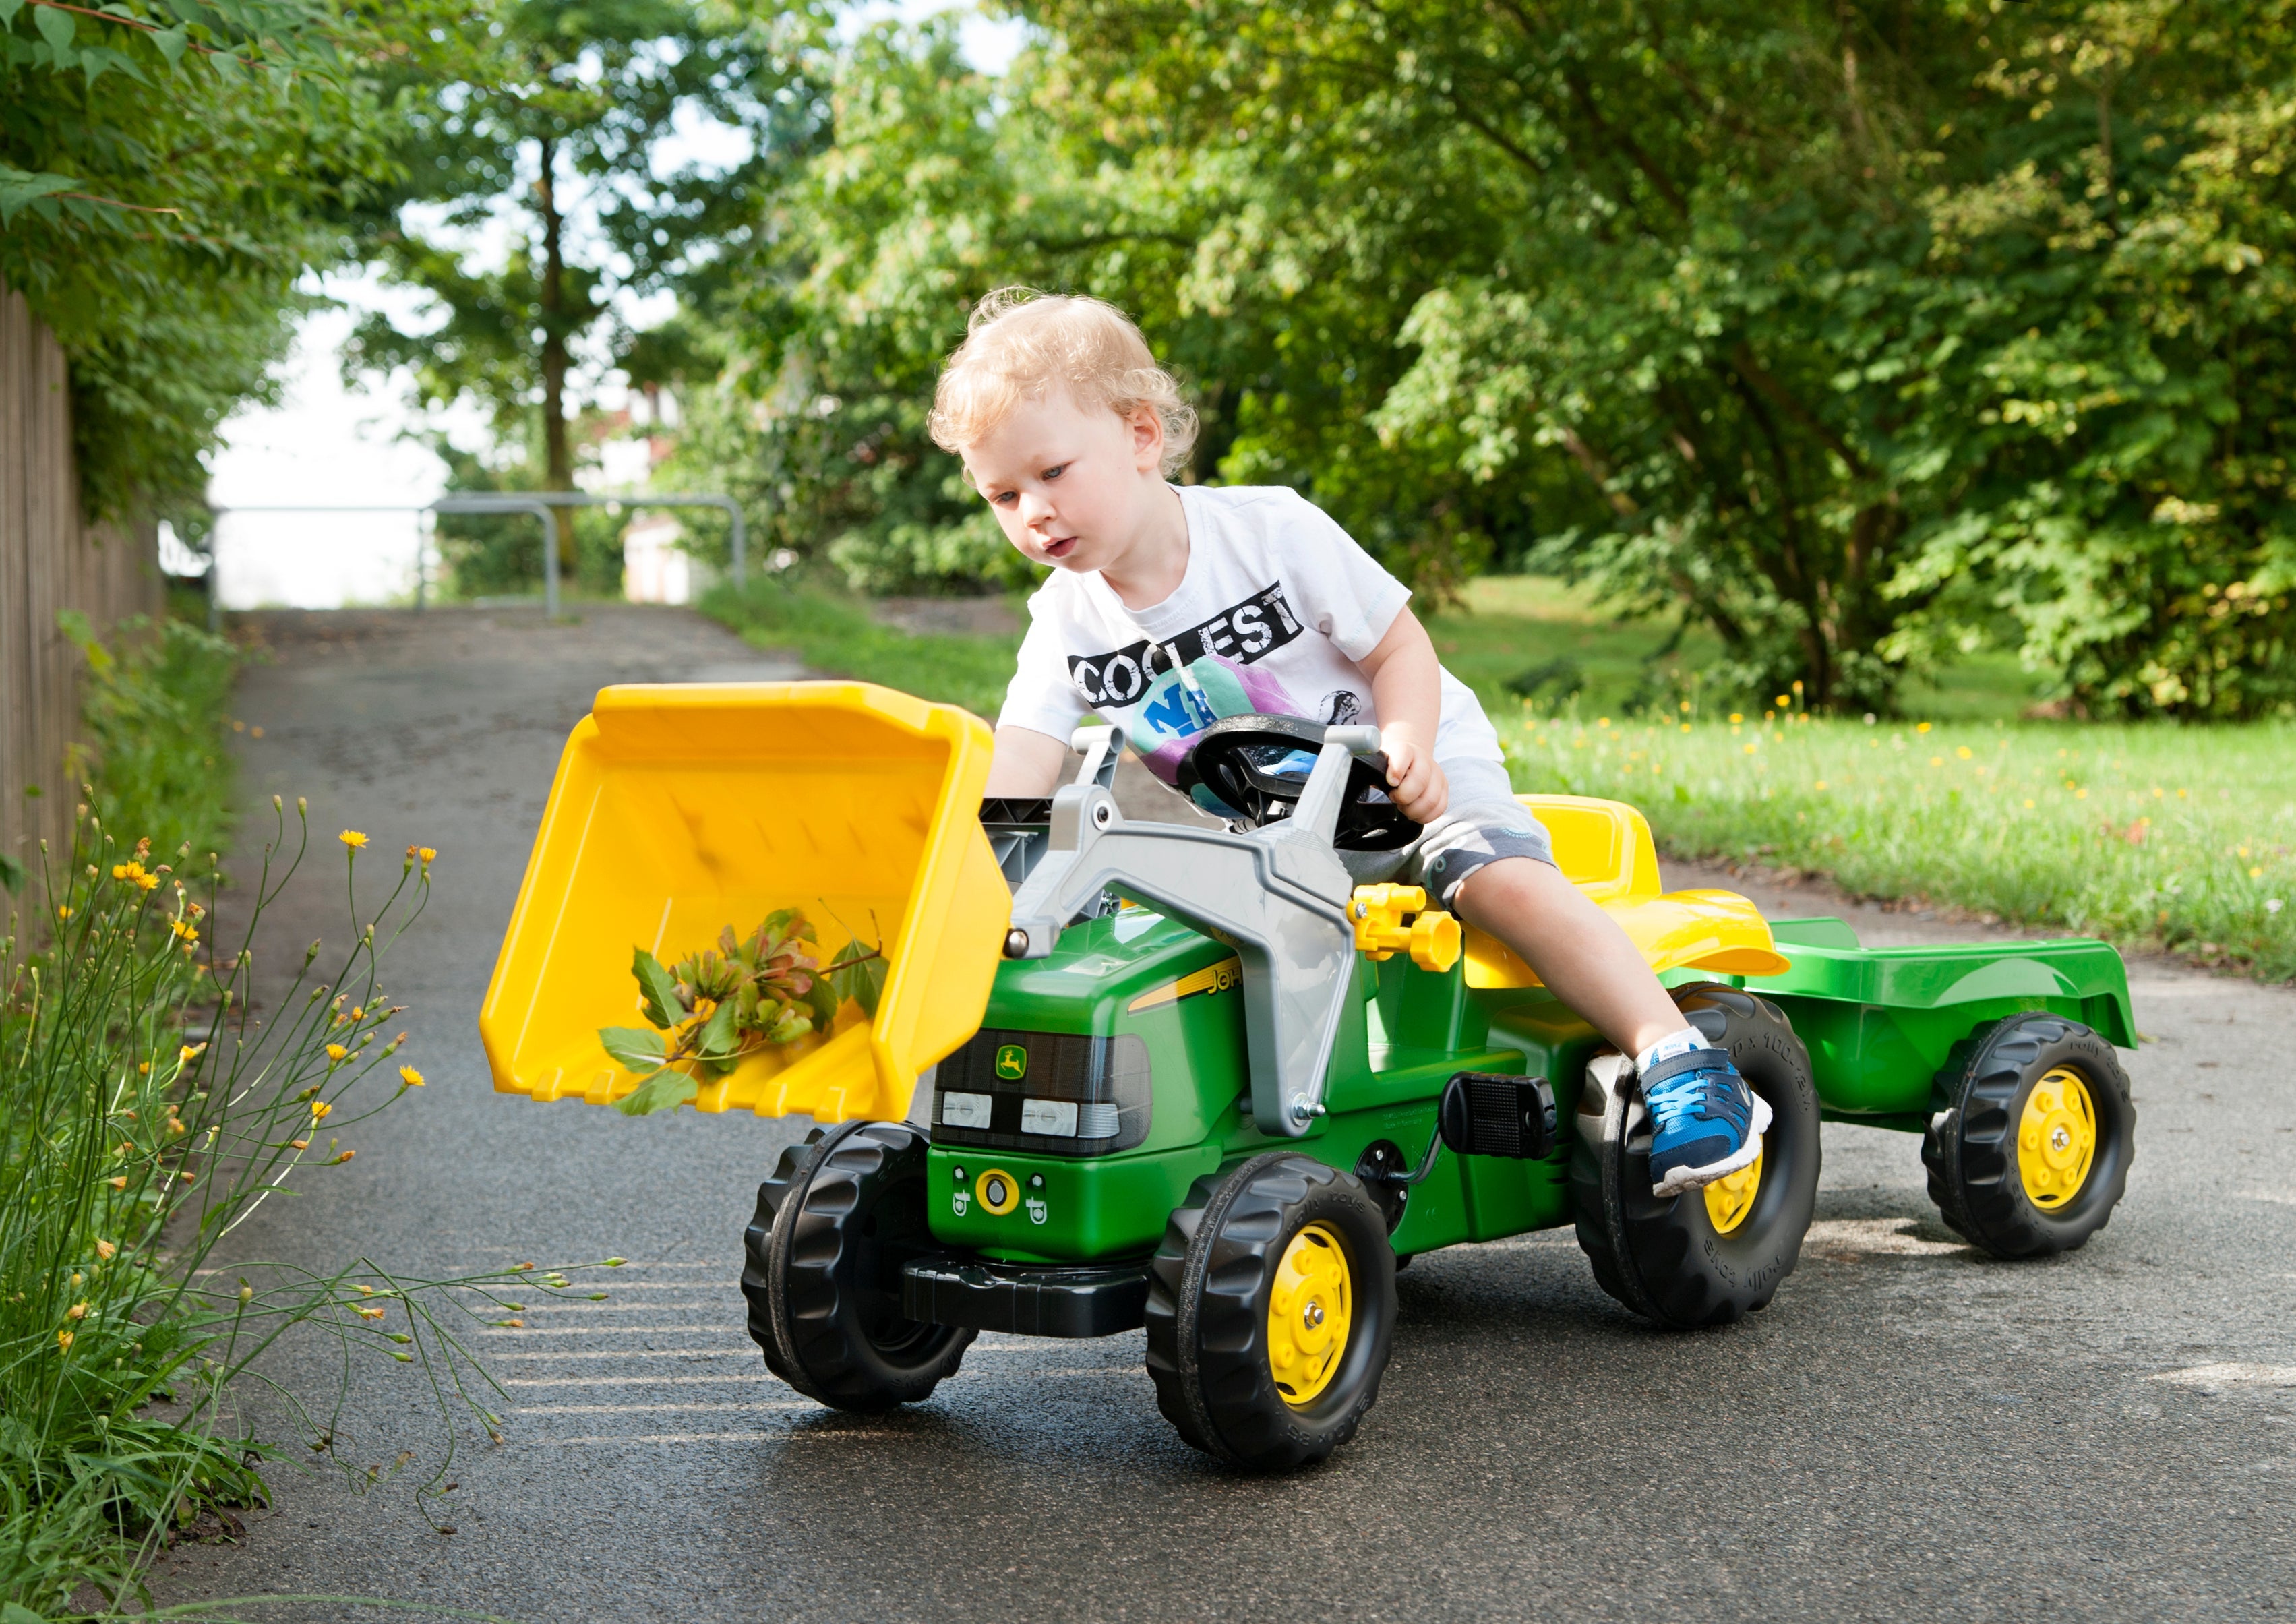 Child dumping load from front loader on high quality blow molded john deere ride on resin tractor